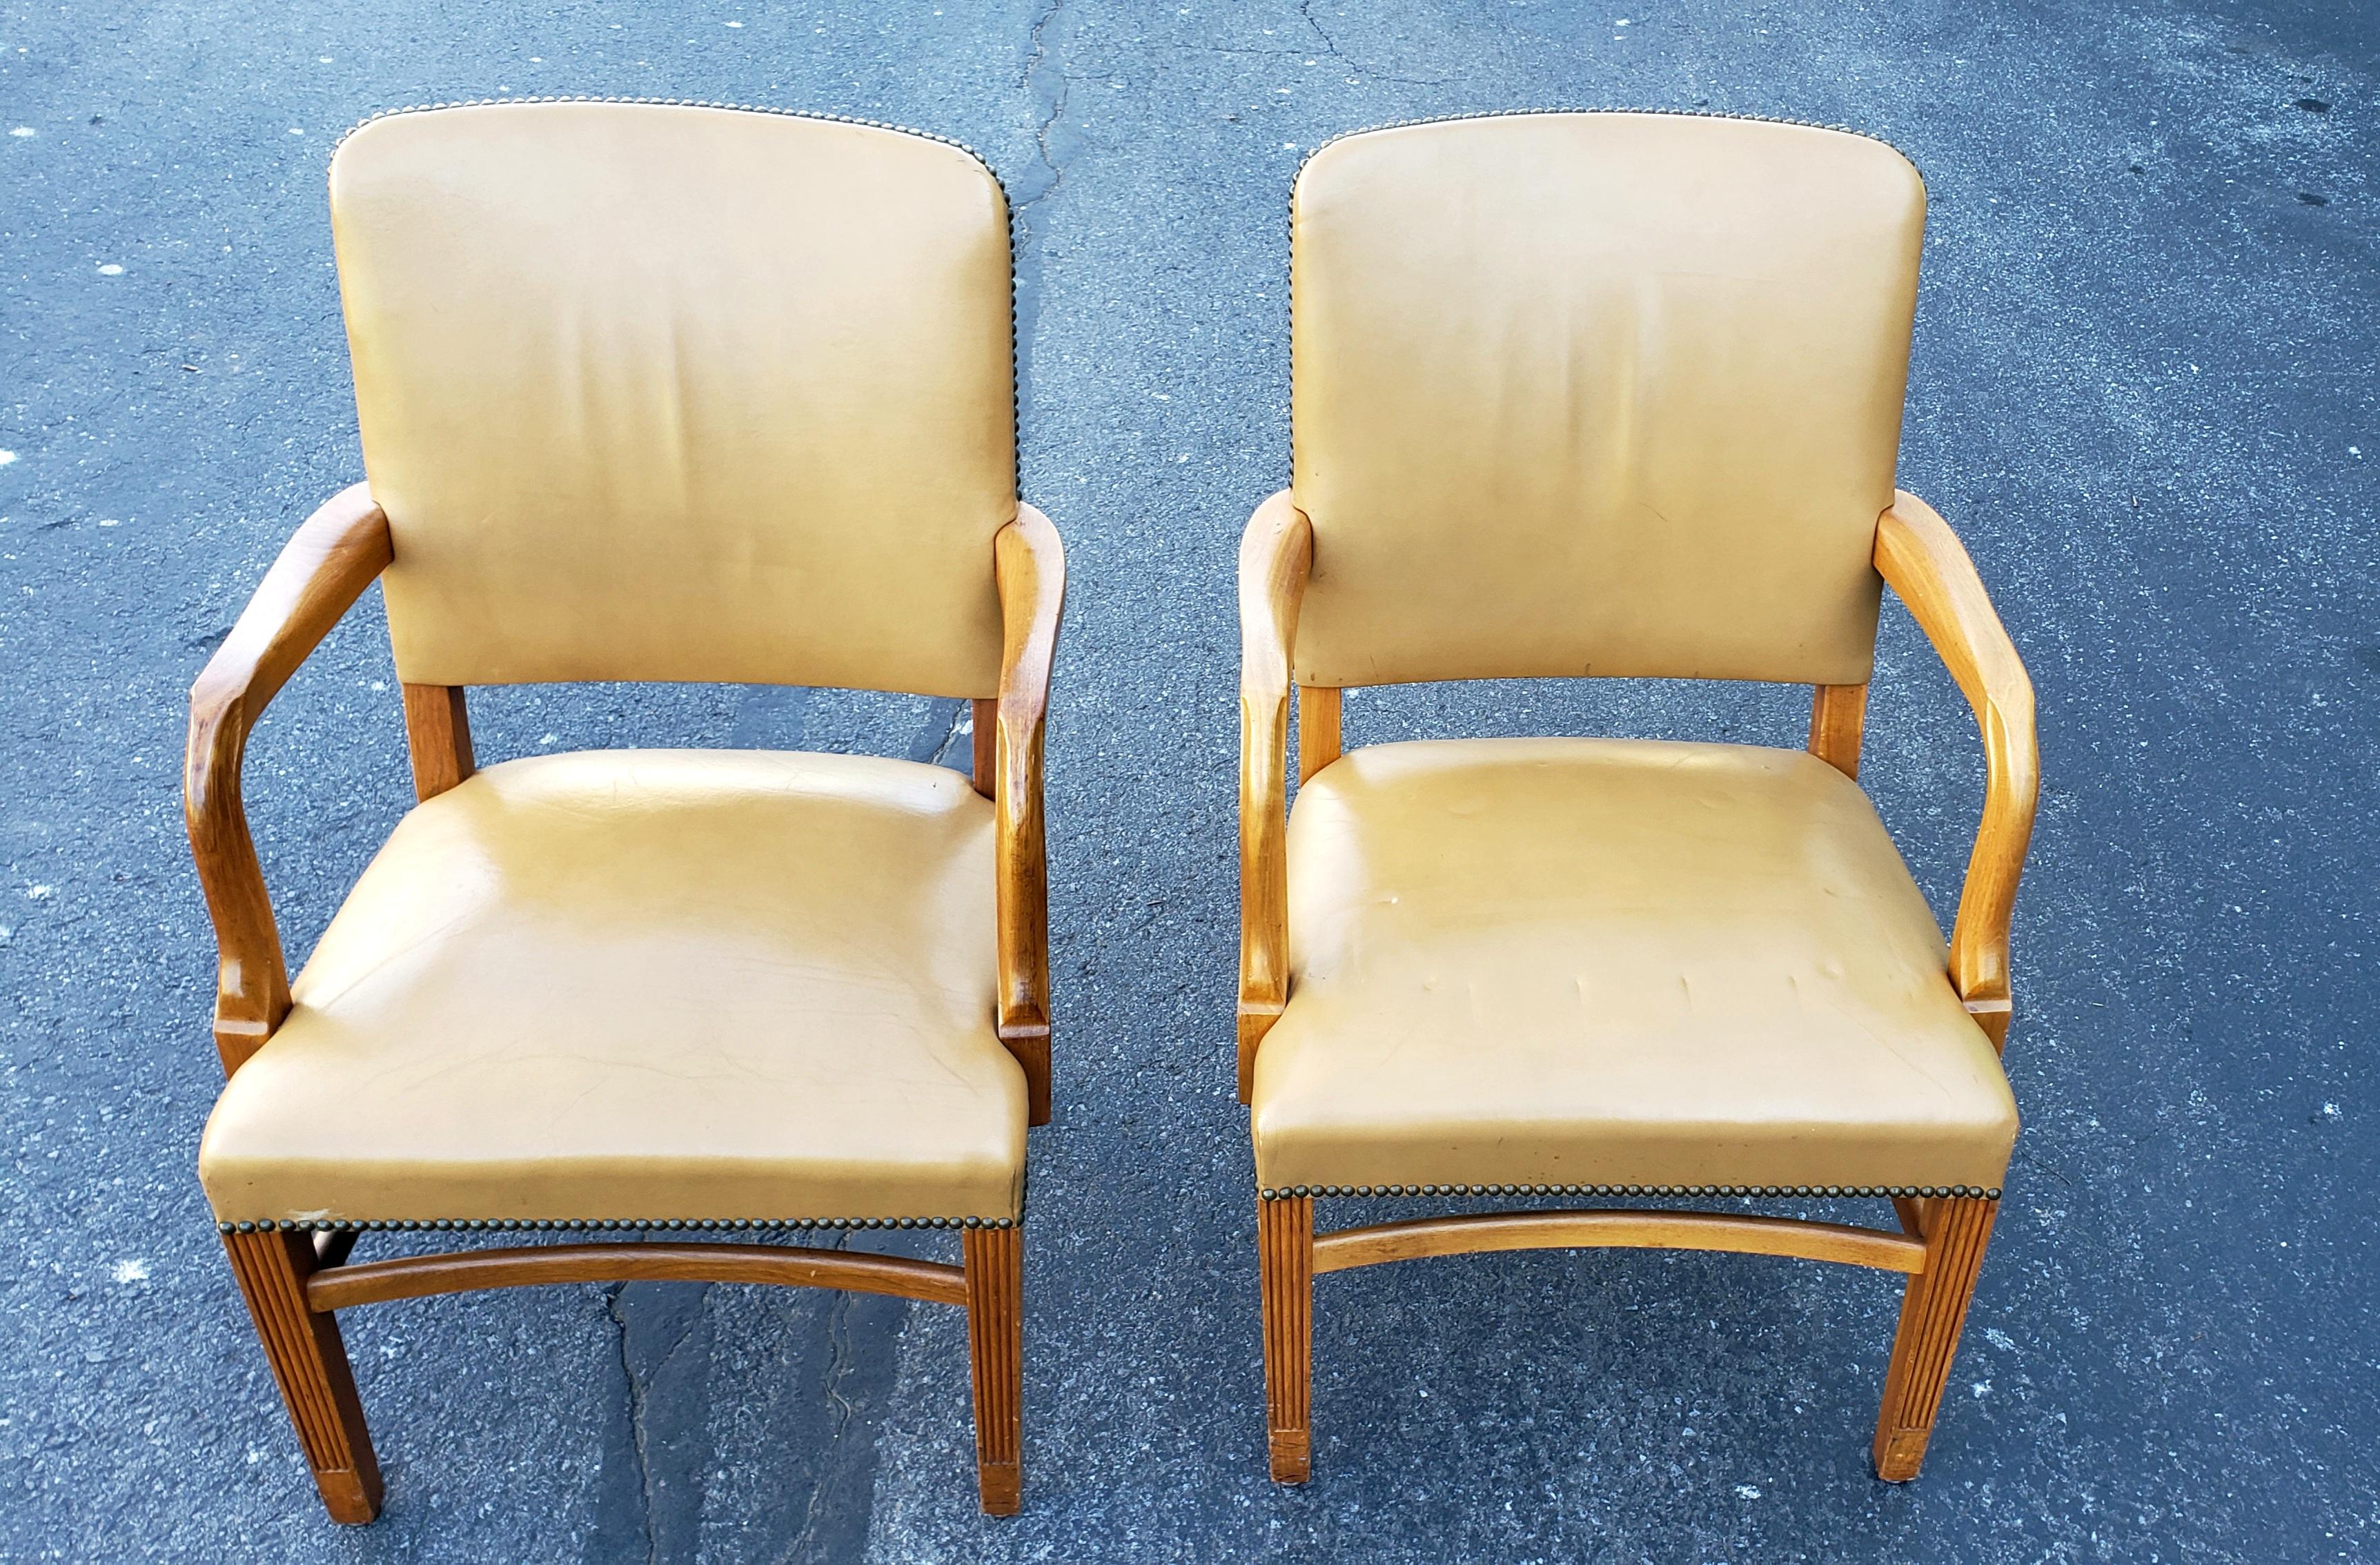 Pair of 1970s Gunlocke fruitwood and leather armchairs. Tan top grain leather . Very firm seats. Very comfortable.